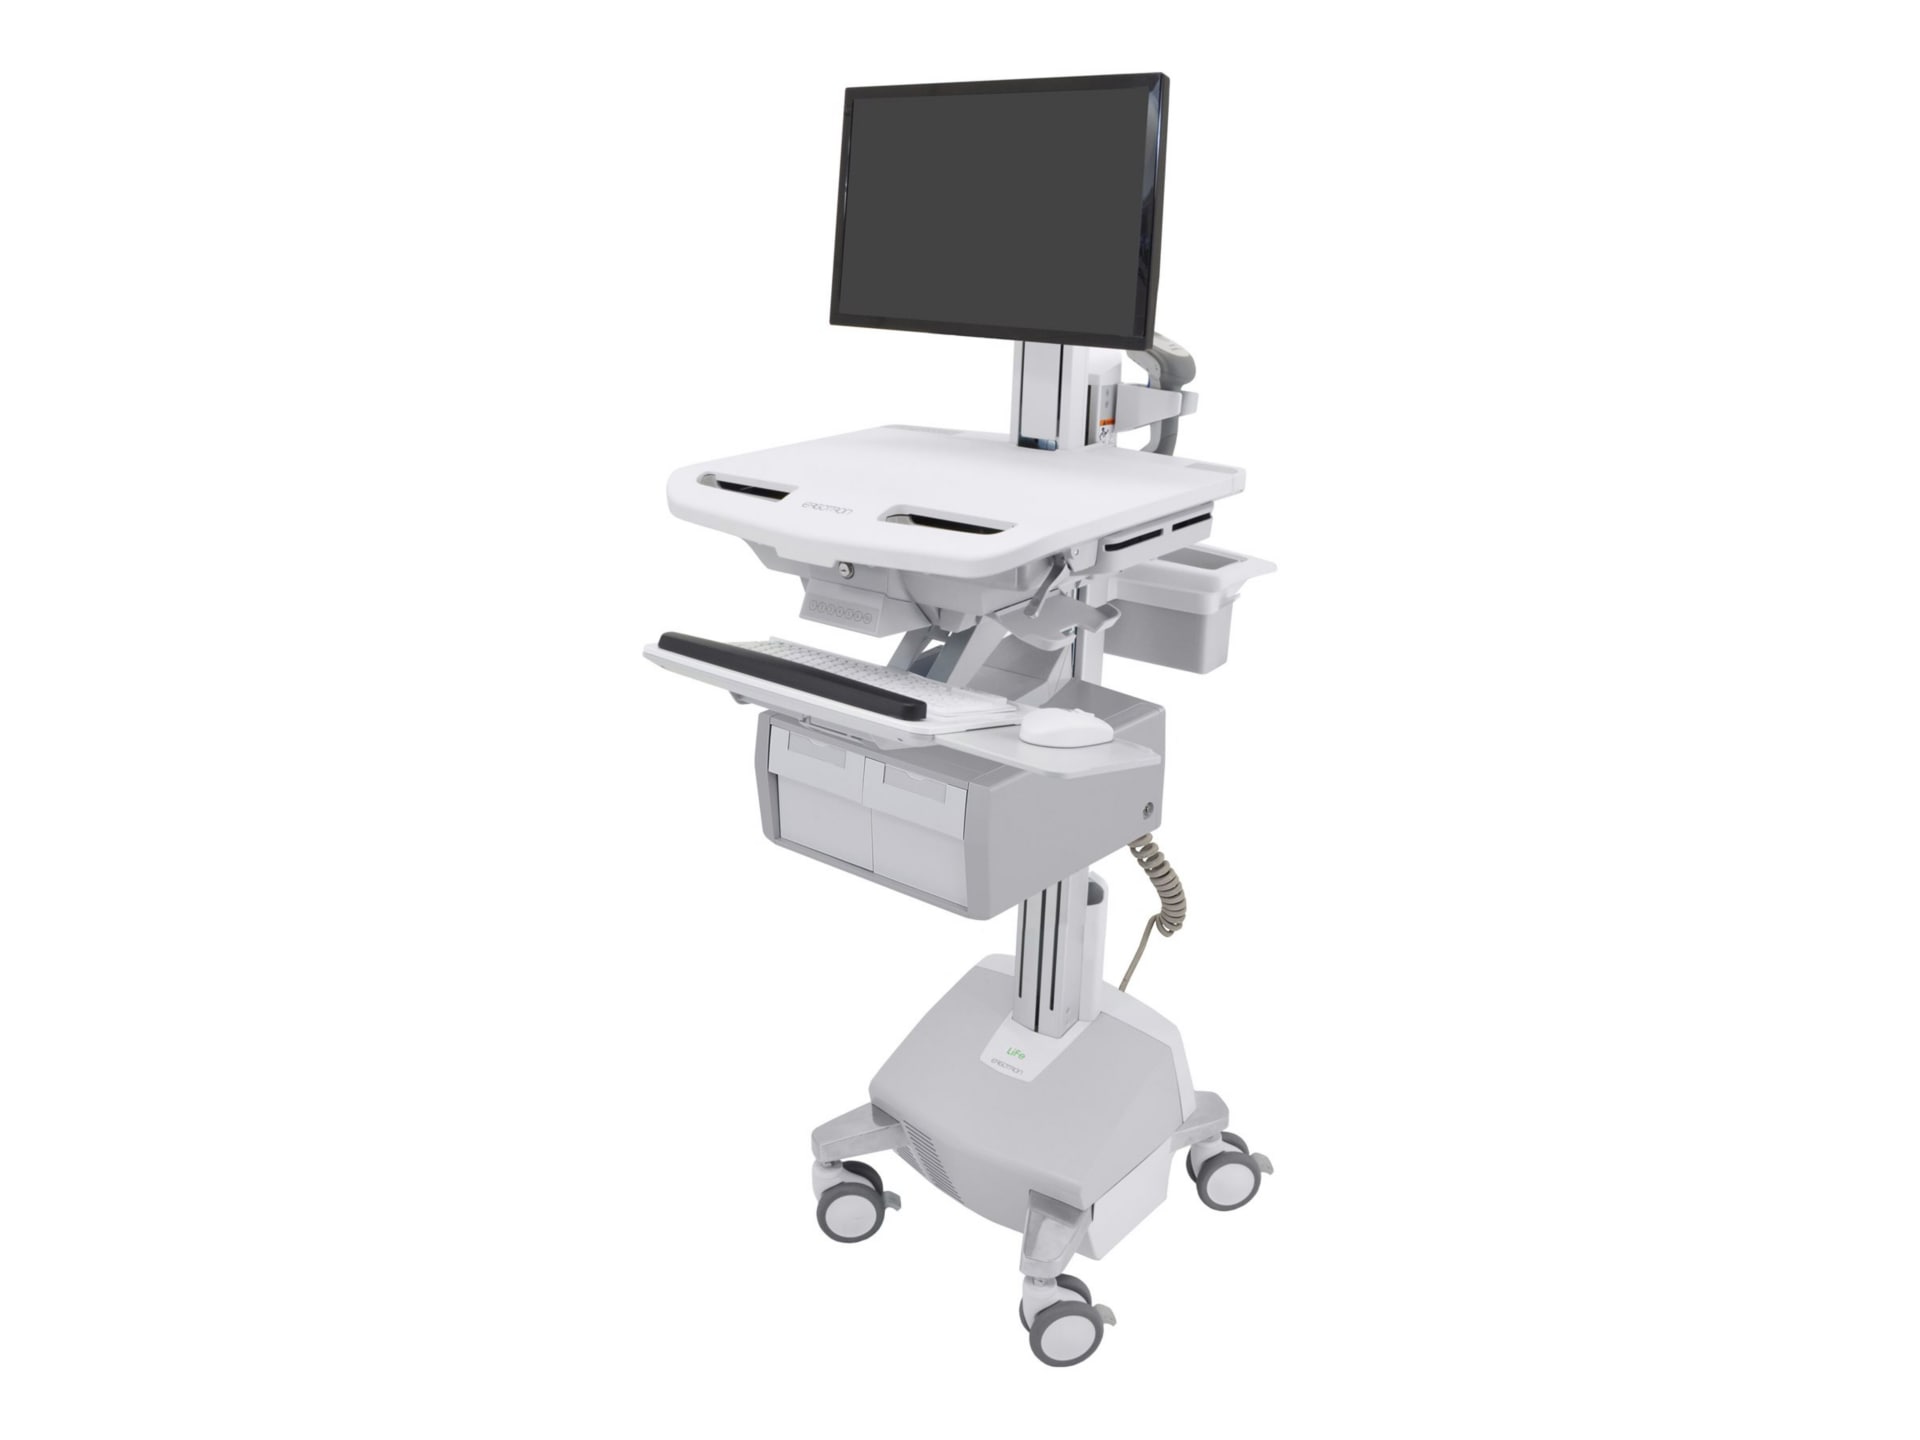 Ergotron StyleView Cart with LCD Pivot, LiFe Powered, 2 Tall Drawers cart - for LCD display / keyboard / mouse / barcode